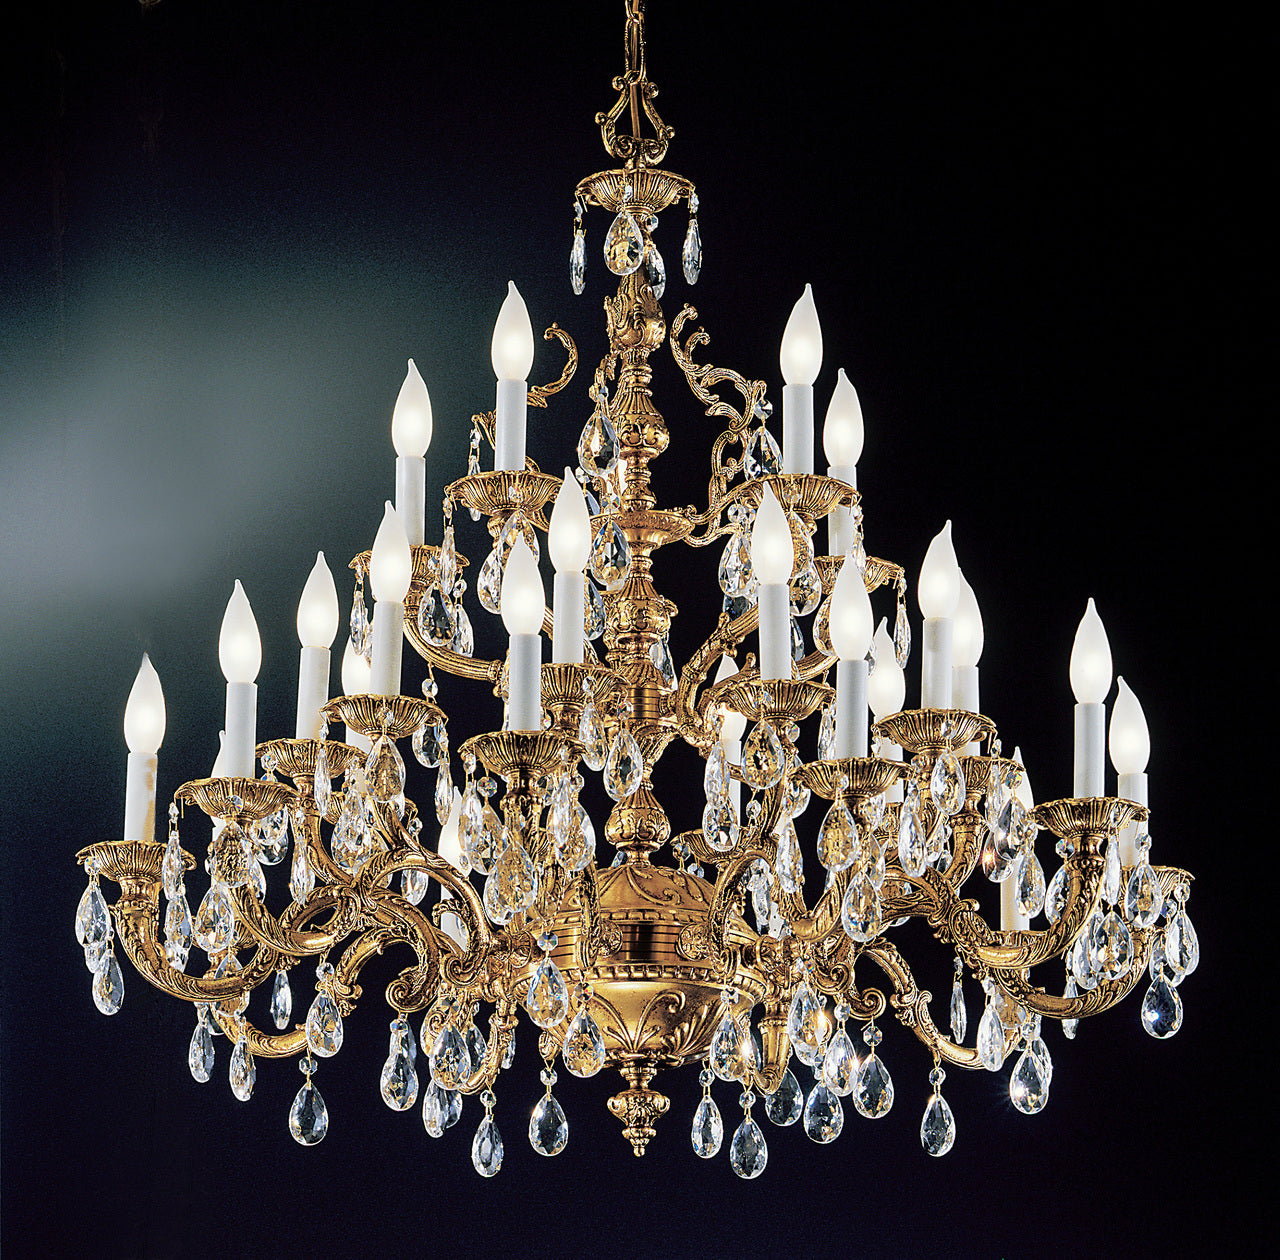 Classic Lighting 5525 OWB C Barcelona Crystal/Cast Brass Chandelier in Olde World Bronze (Imported from Spain)